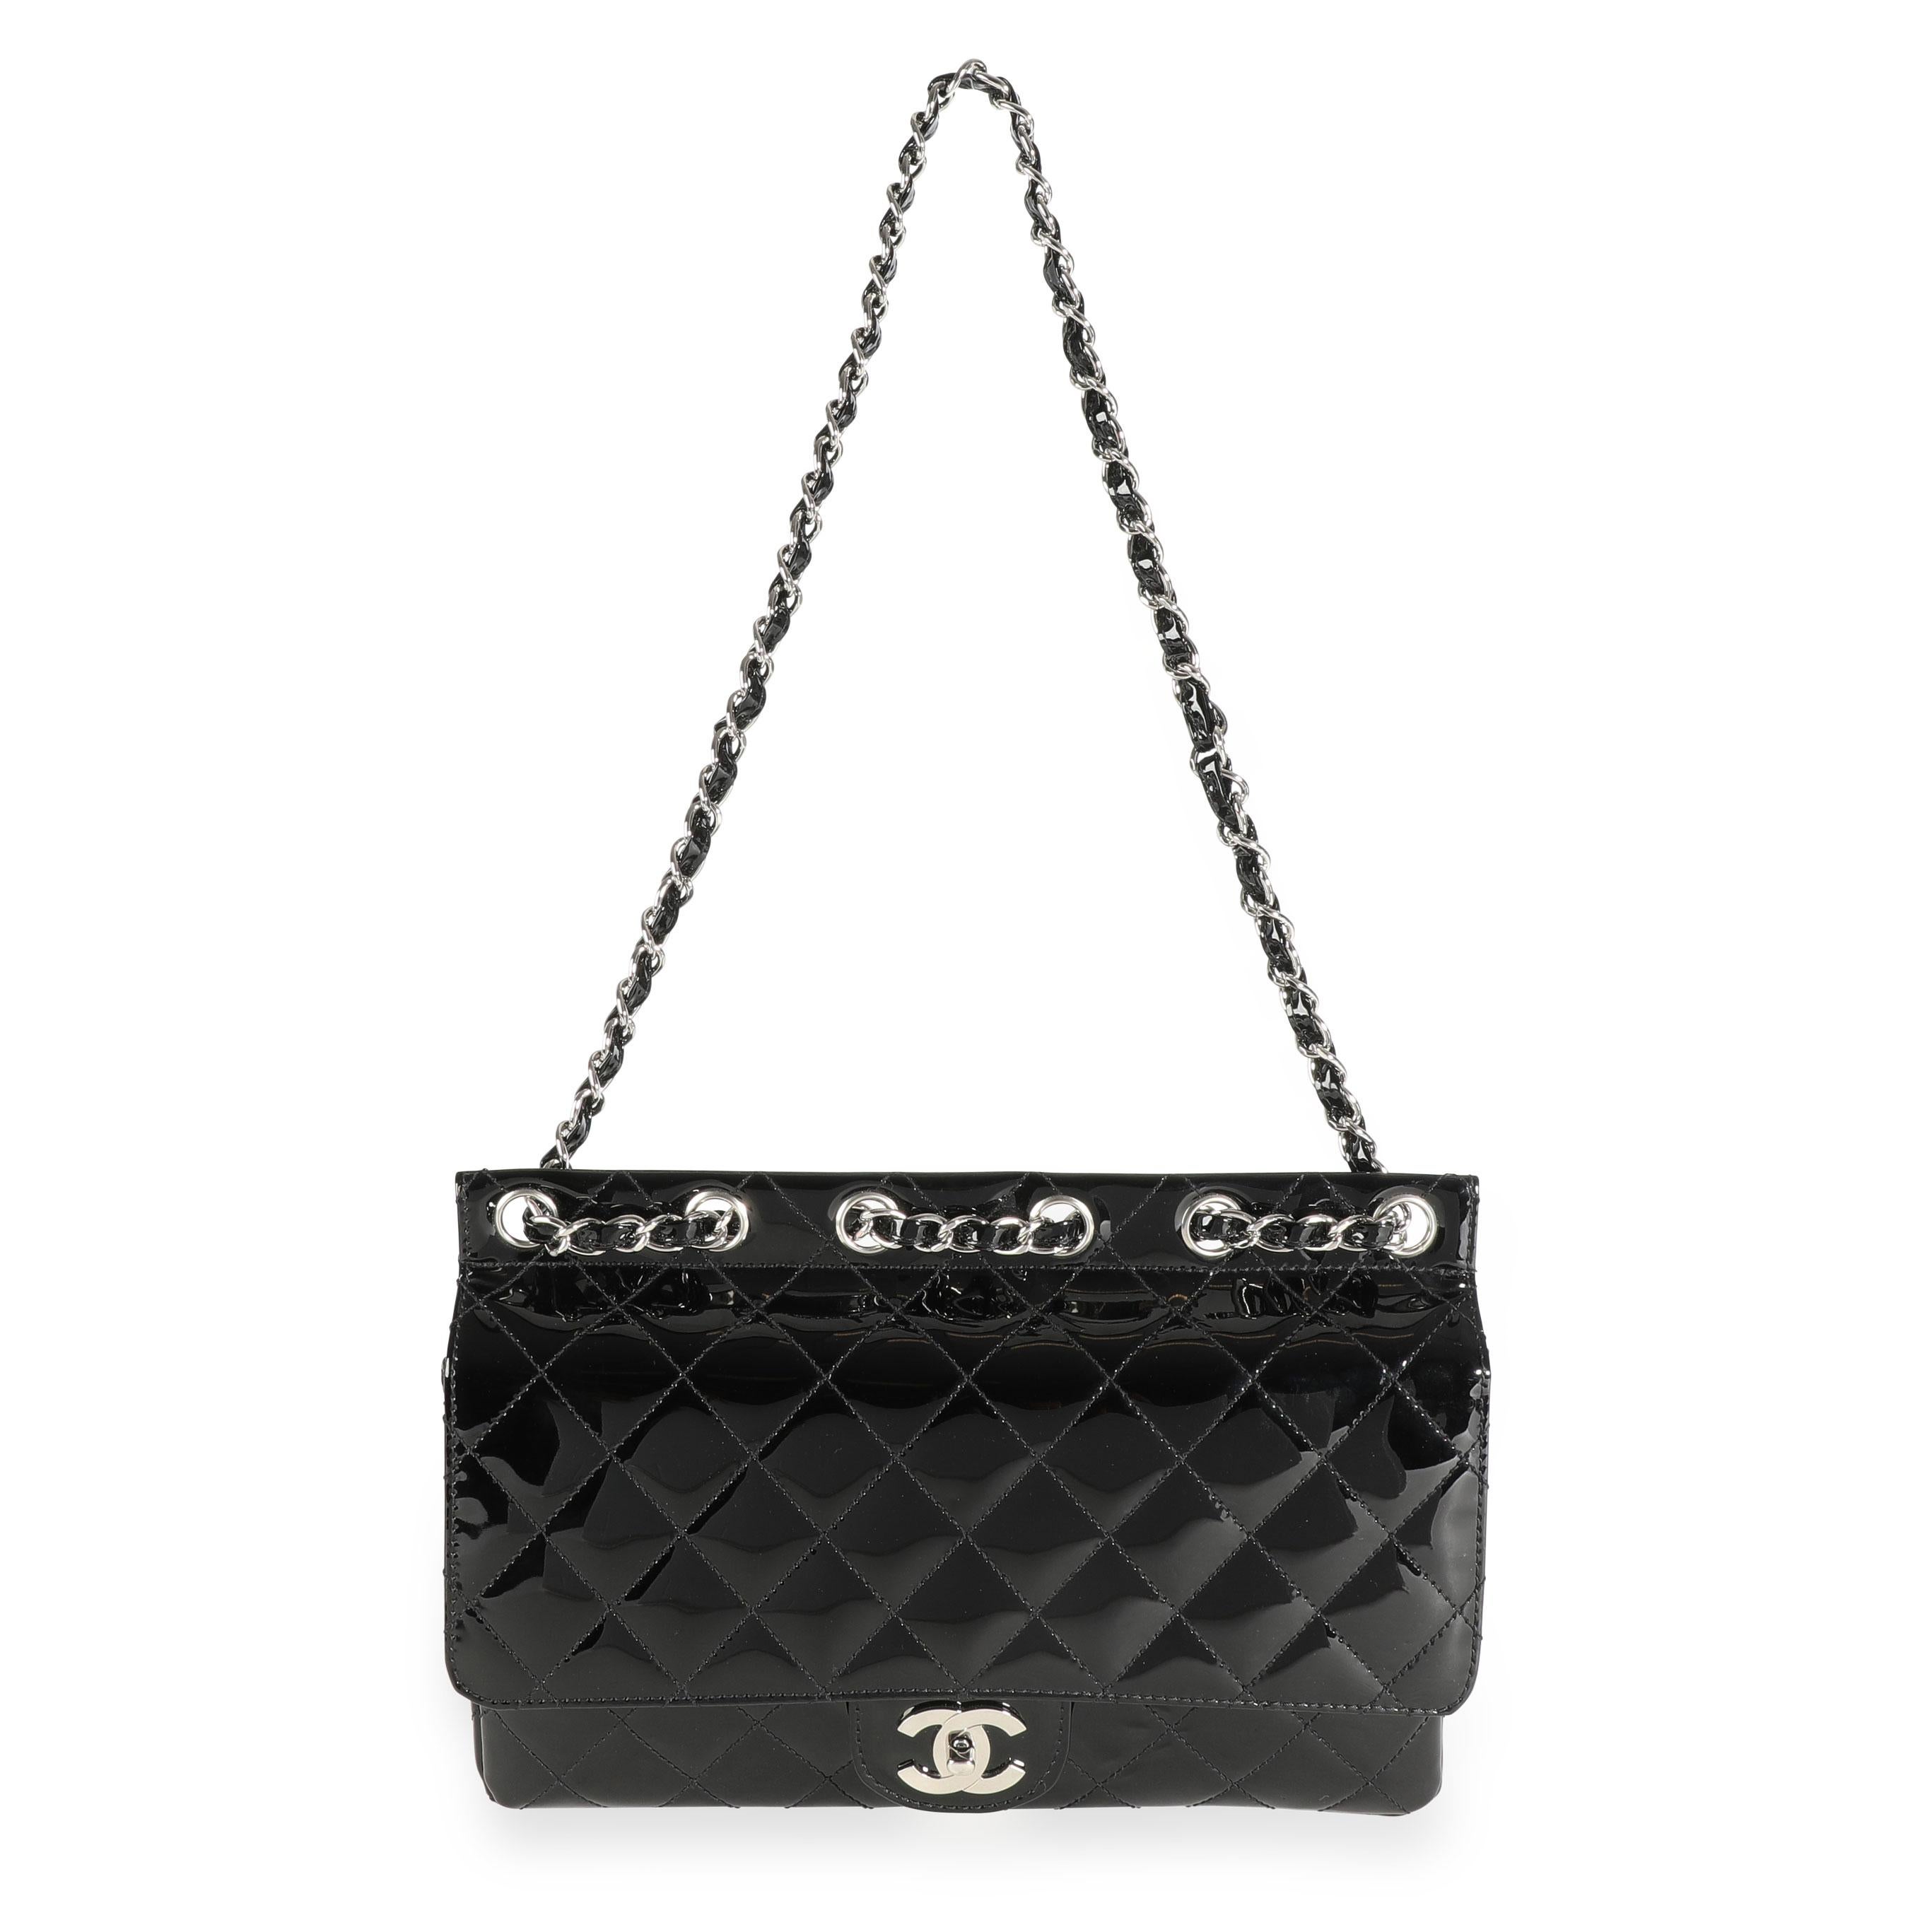 Women's Chanel Black Quilted Patent Leather Supermodel Flap Bag